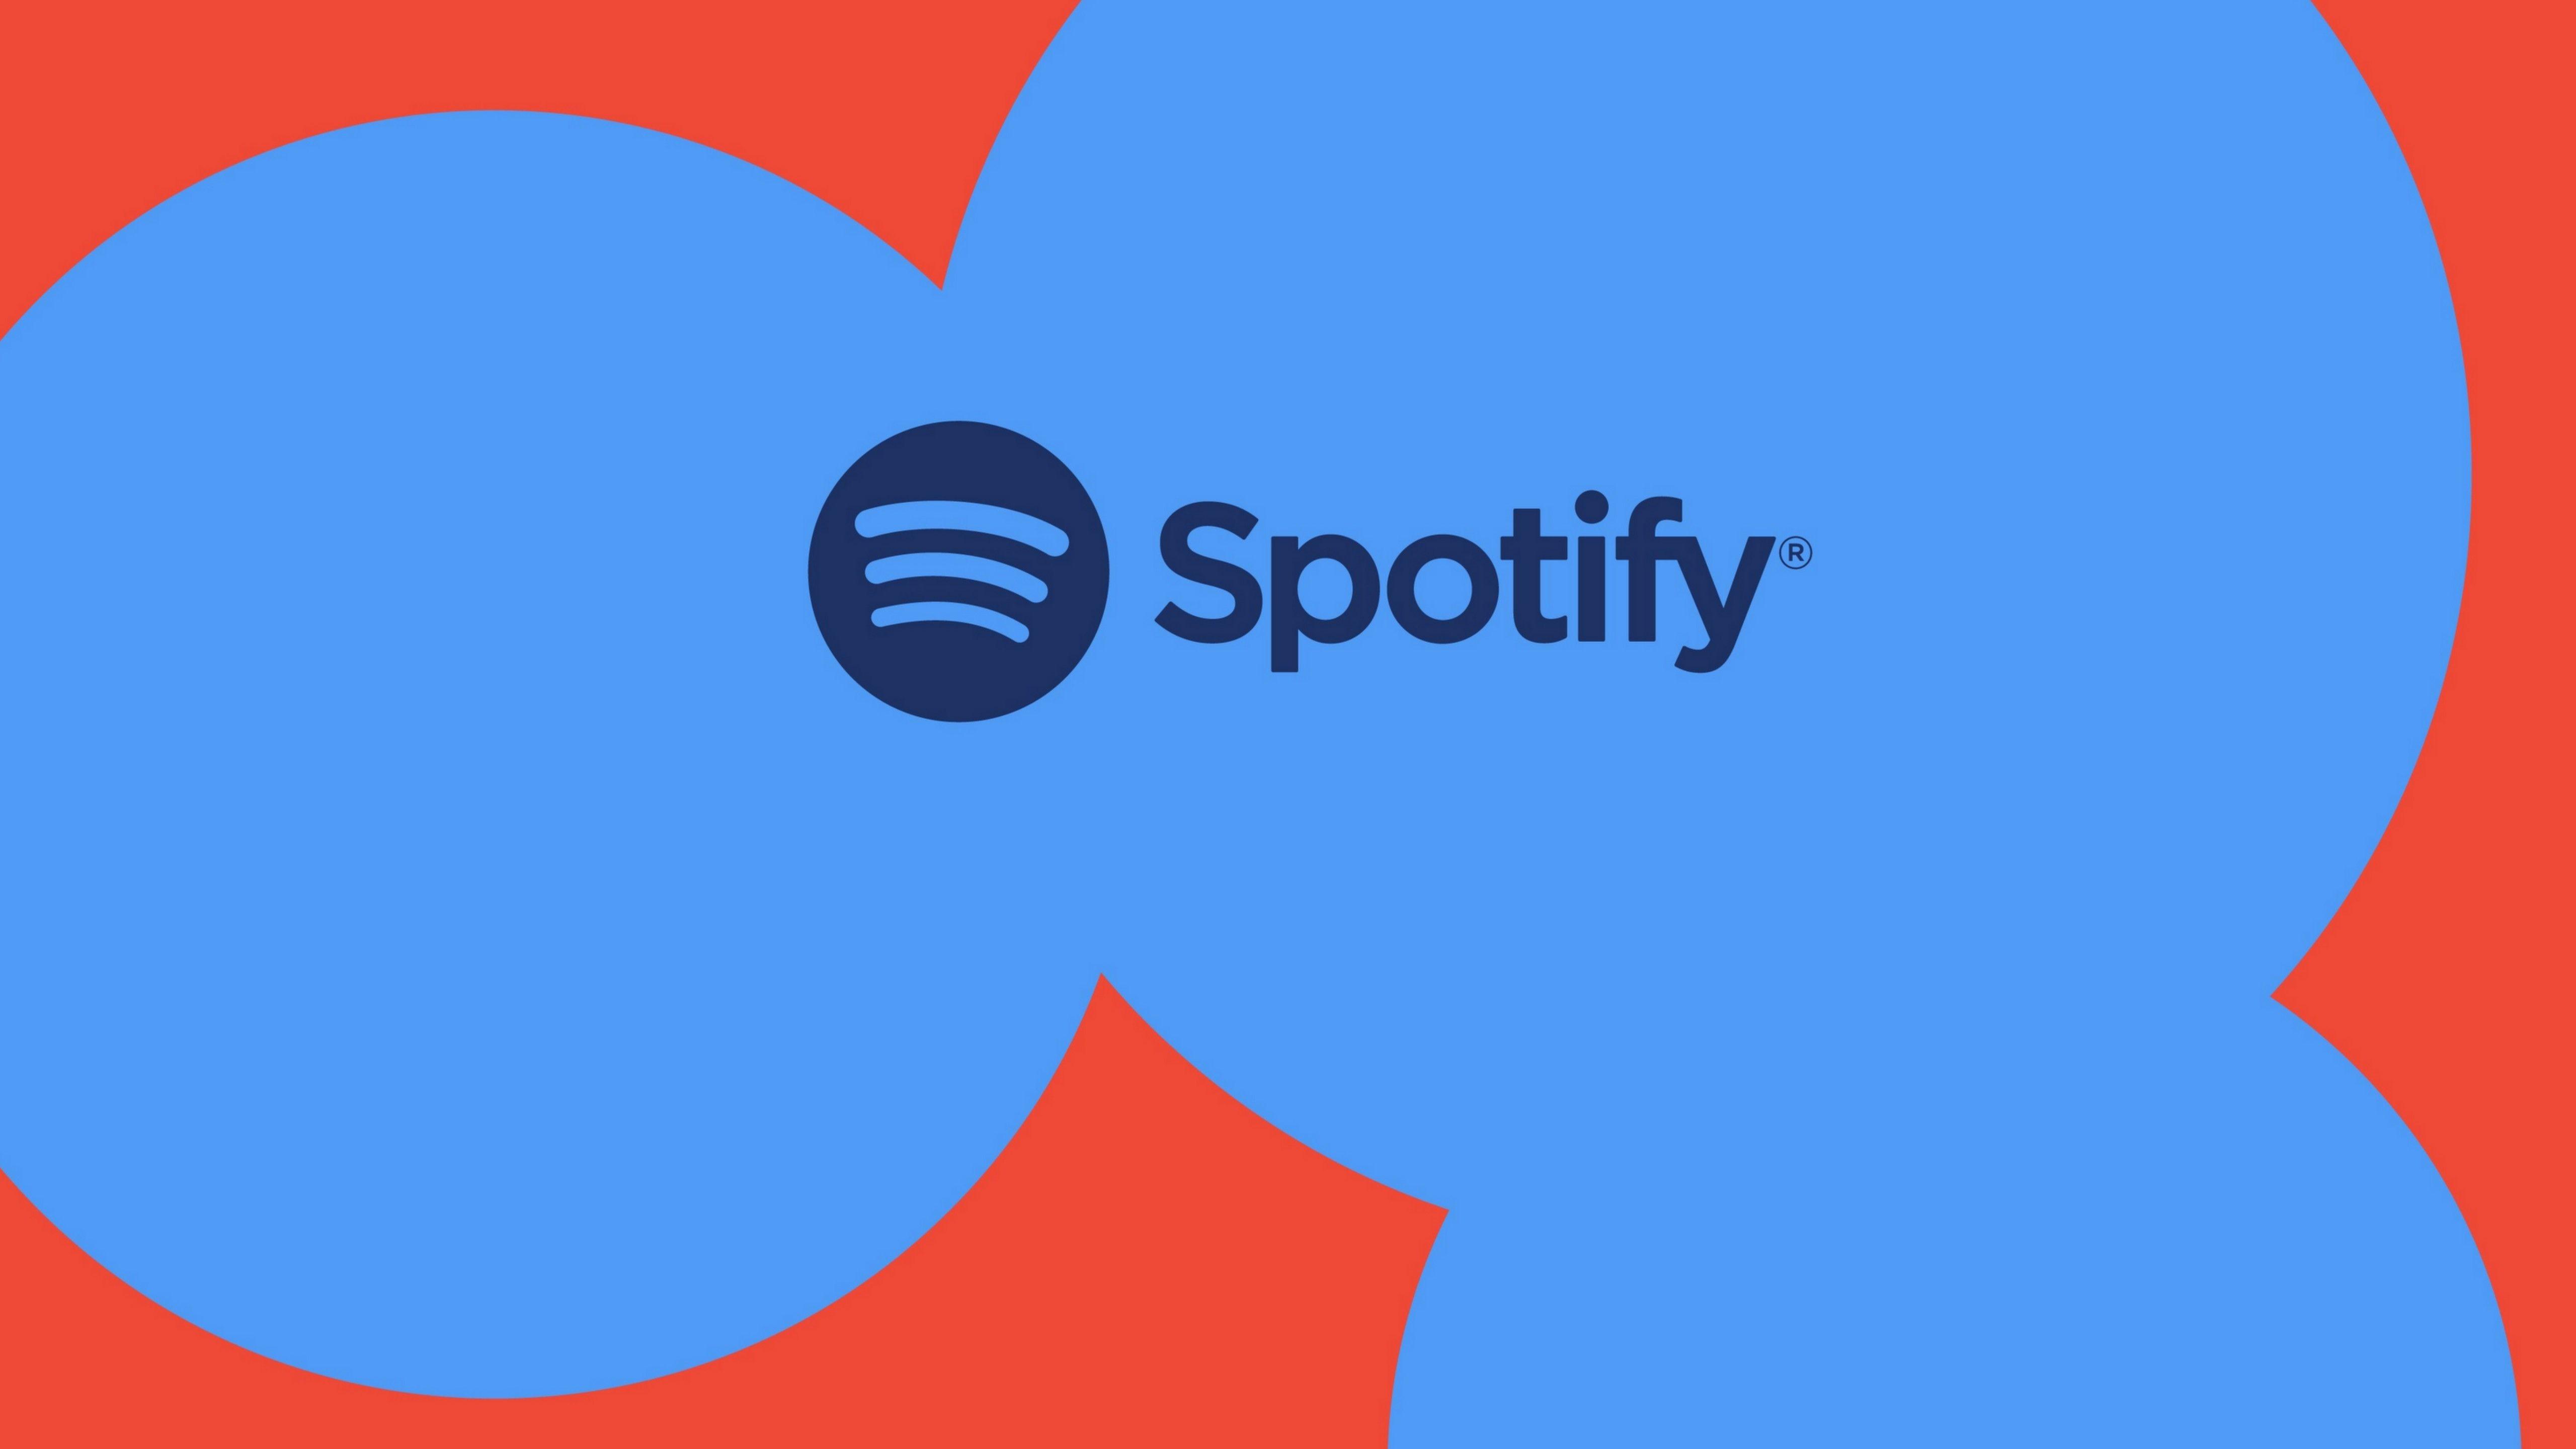 Windows Store Logo - Spotify for Windows 10 available now in the Windows Store | Windows ...